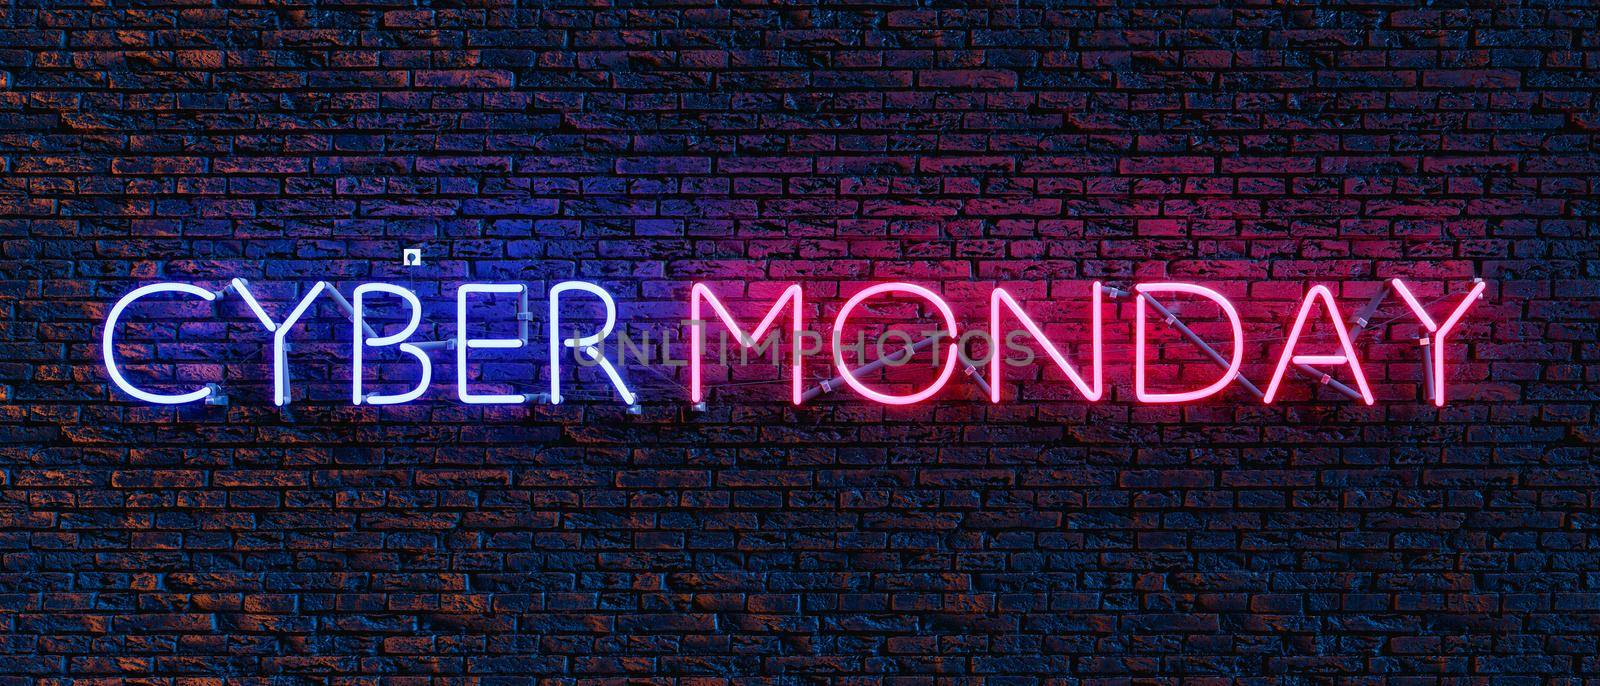 CYBER MONDAY neon sign by asolano